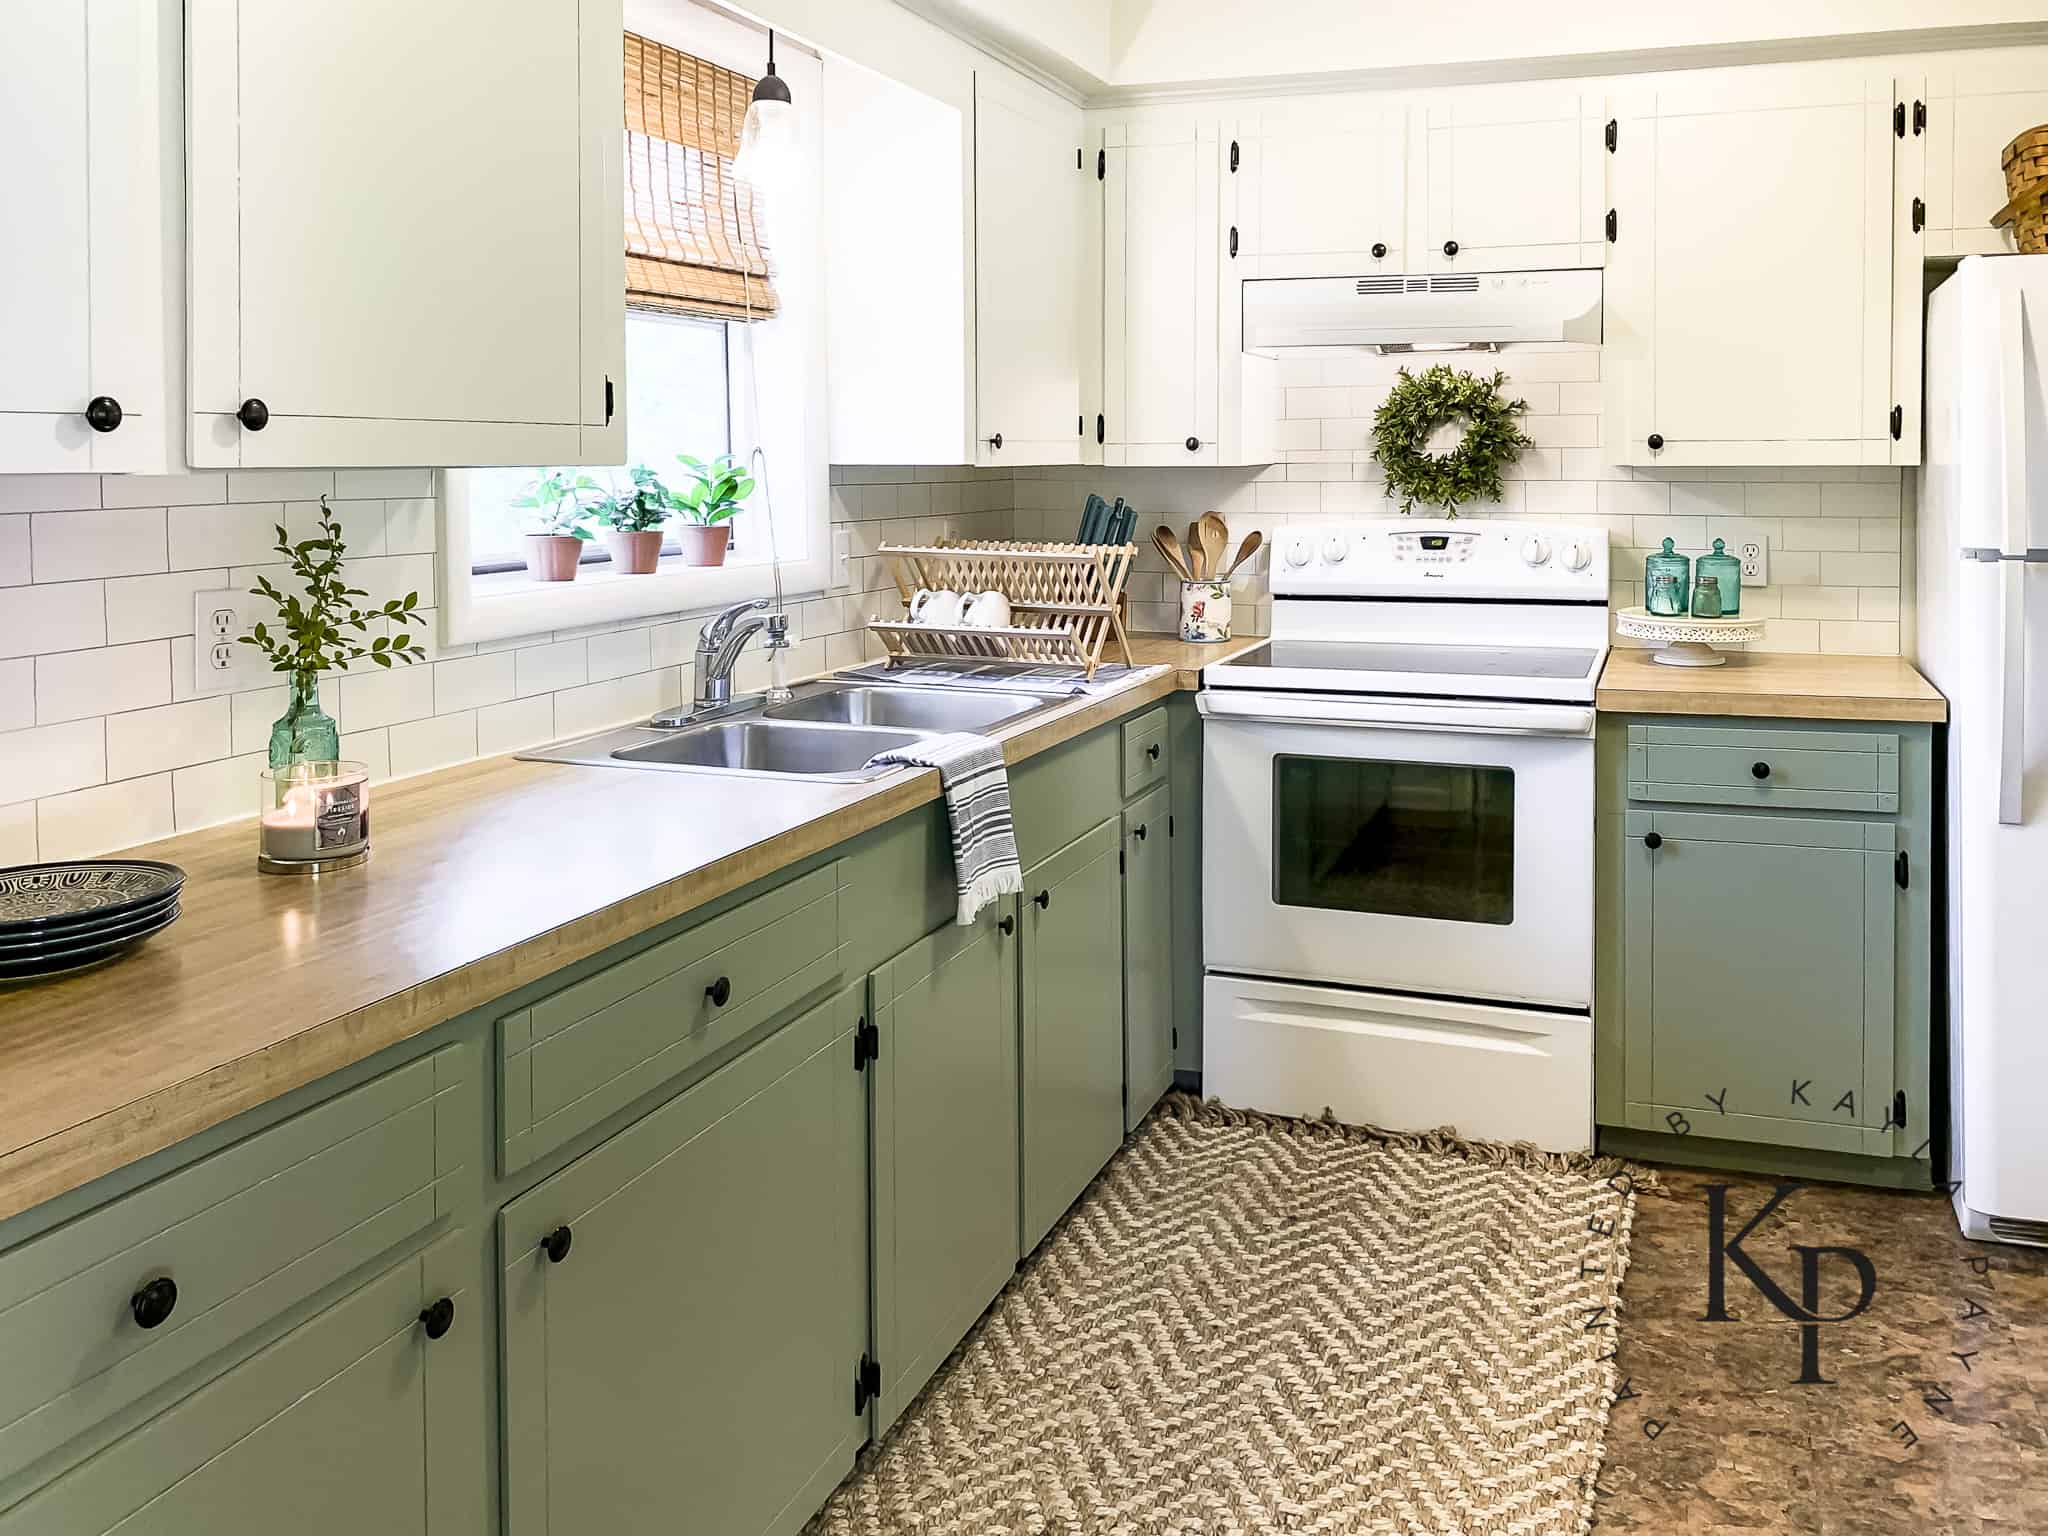 How To Repaint Kitchen Cabinets - Painted by Kayla Payne